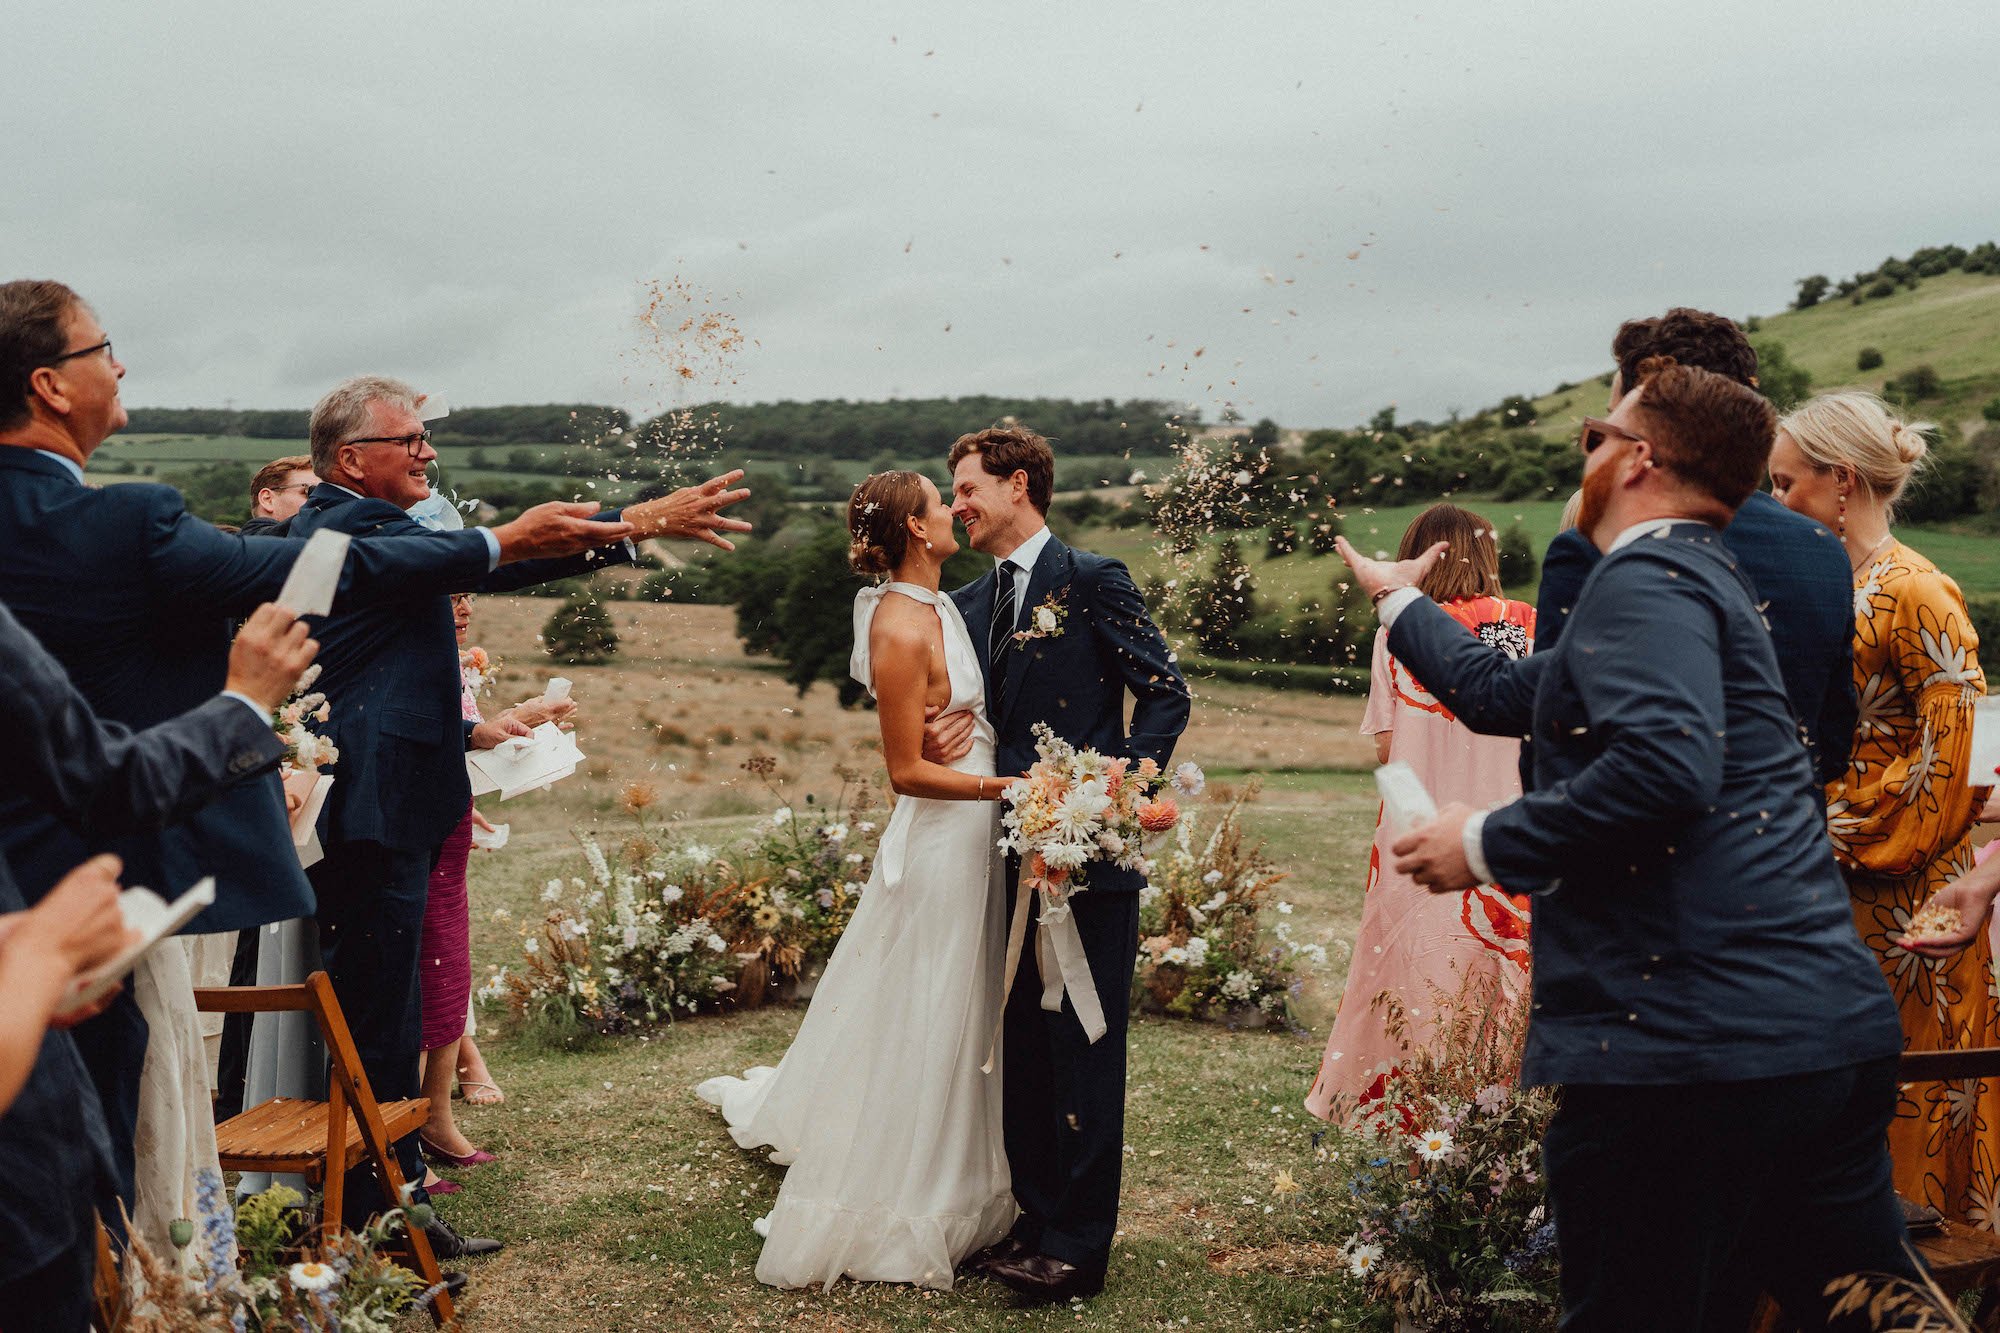 Beautiful bride Laura wears the Cheryl dress and Moon skirt for her wedding day | Wedding dresses by Halfpenny London